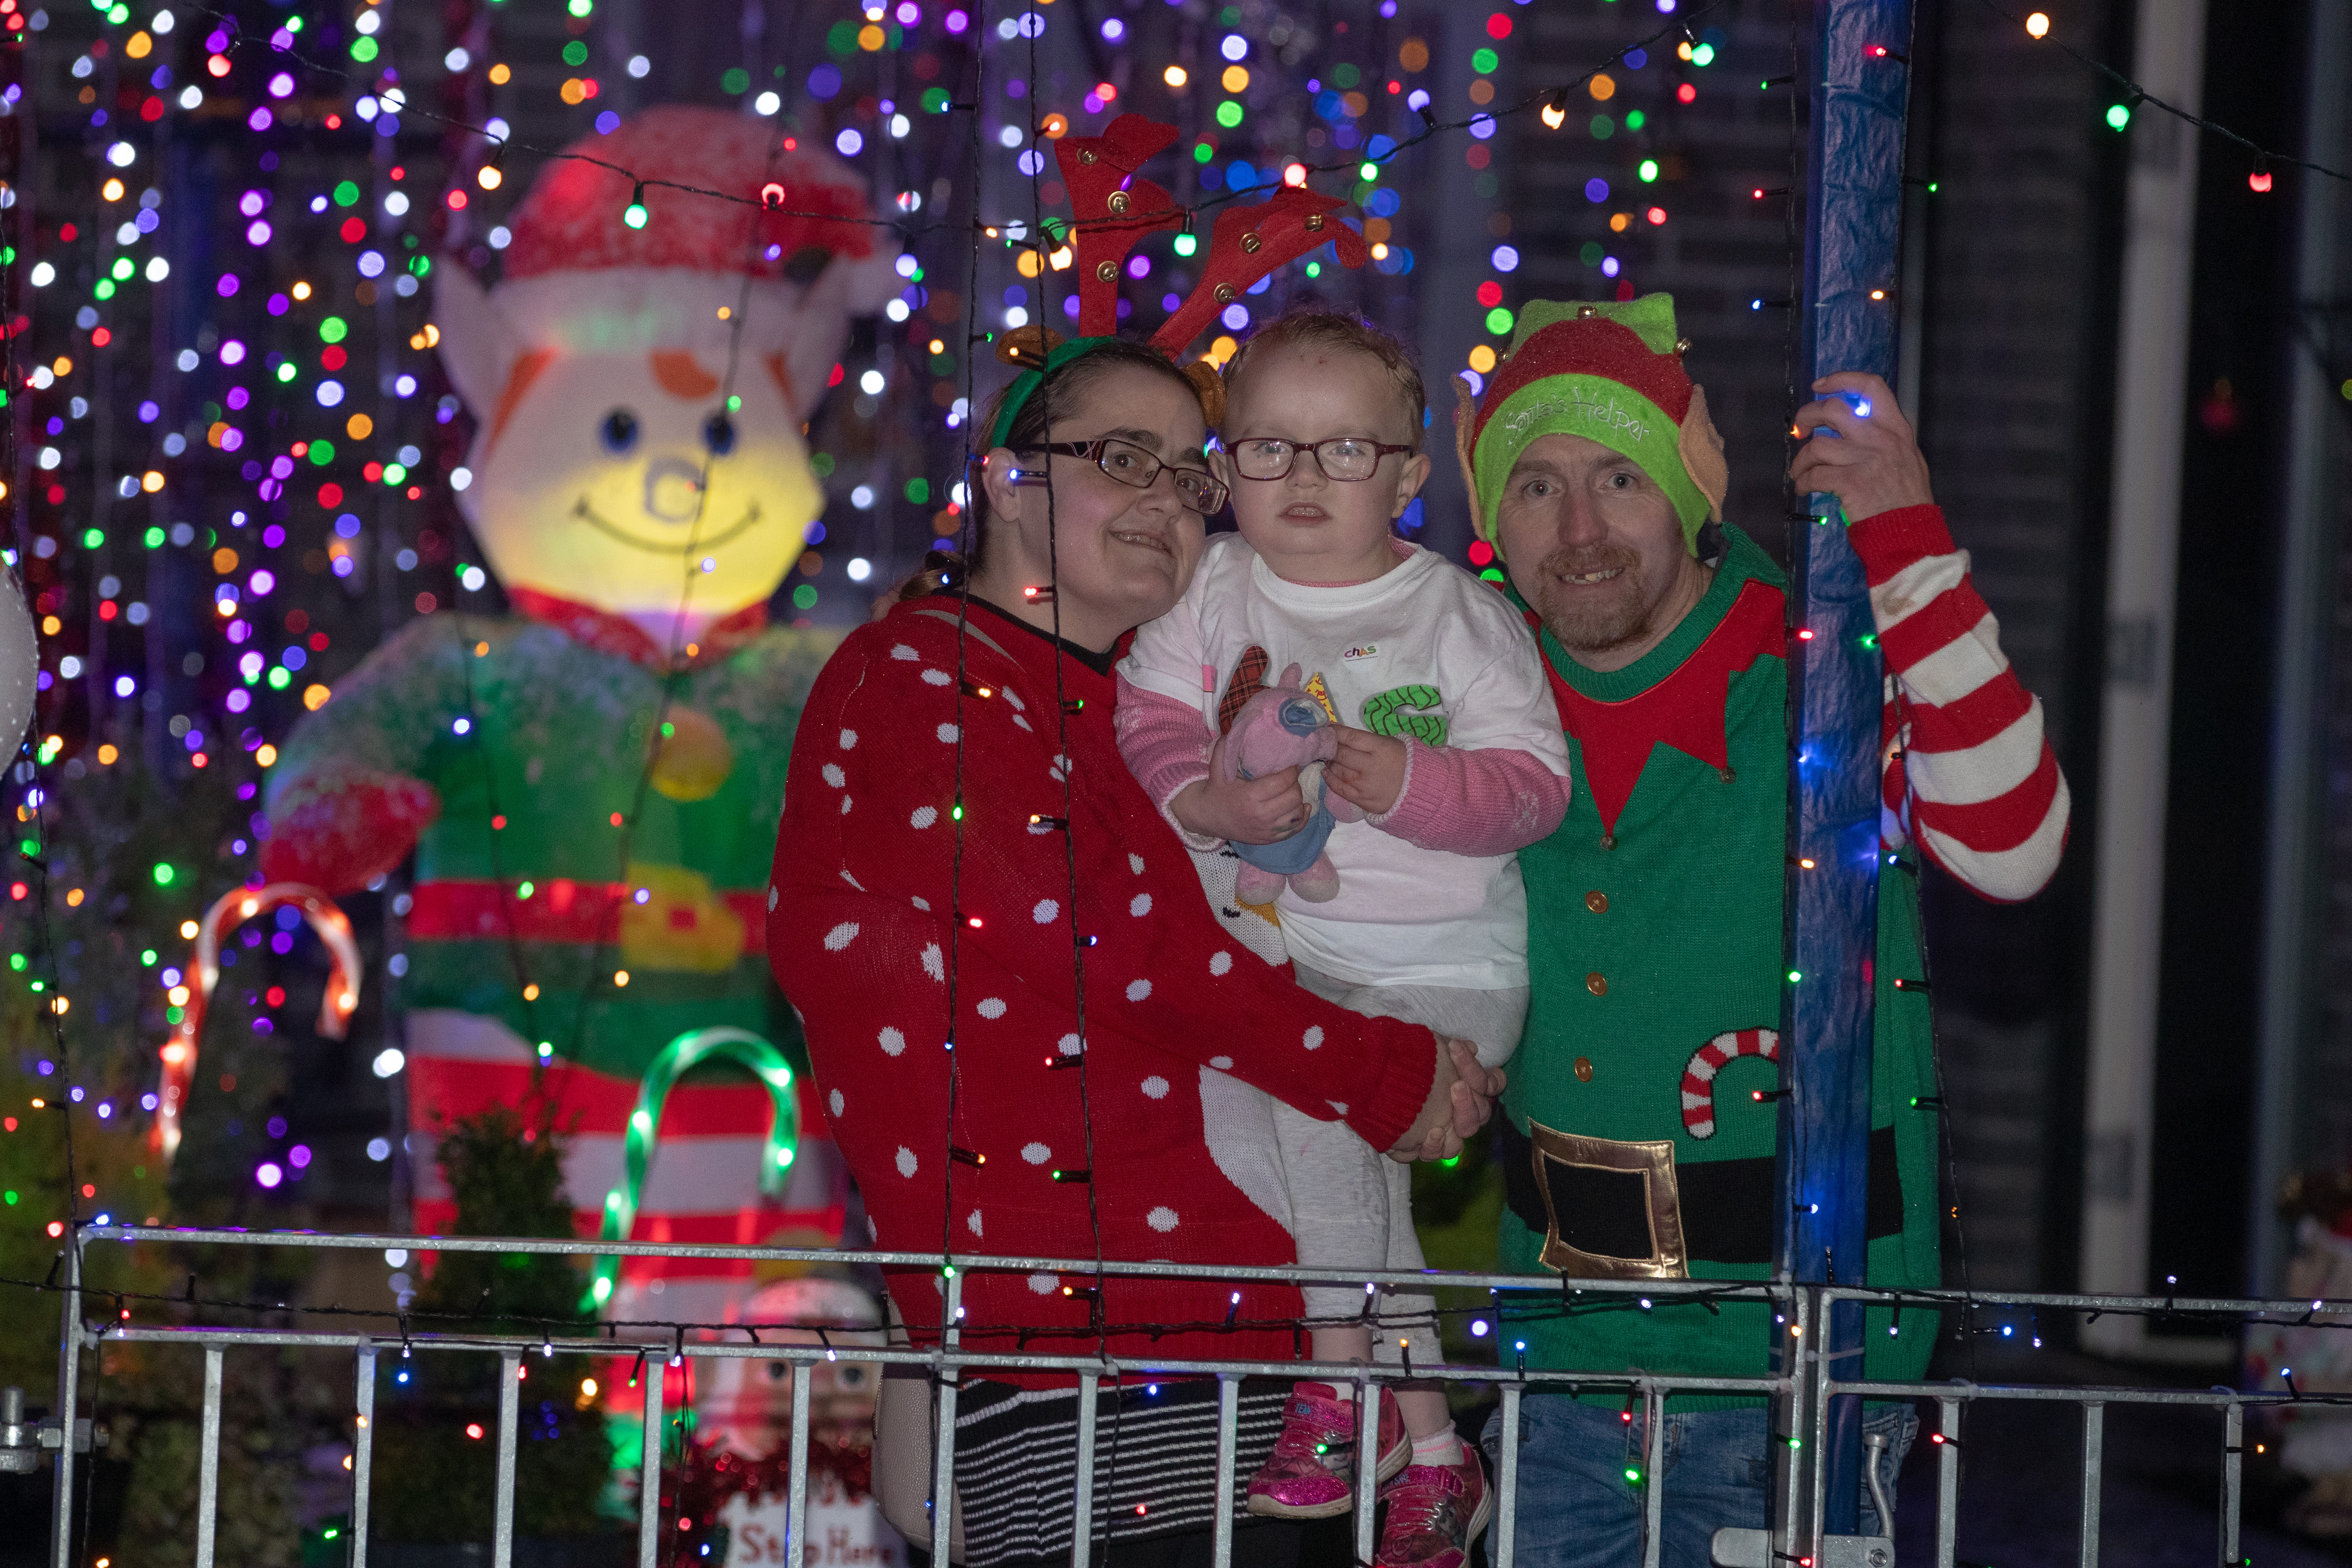 David pictured with his partner Tracey and daughter Rebecca who received a Kidney from David earlier this year.